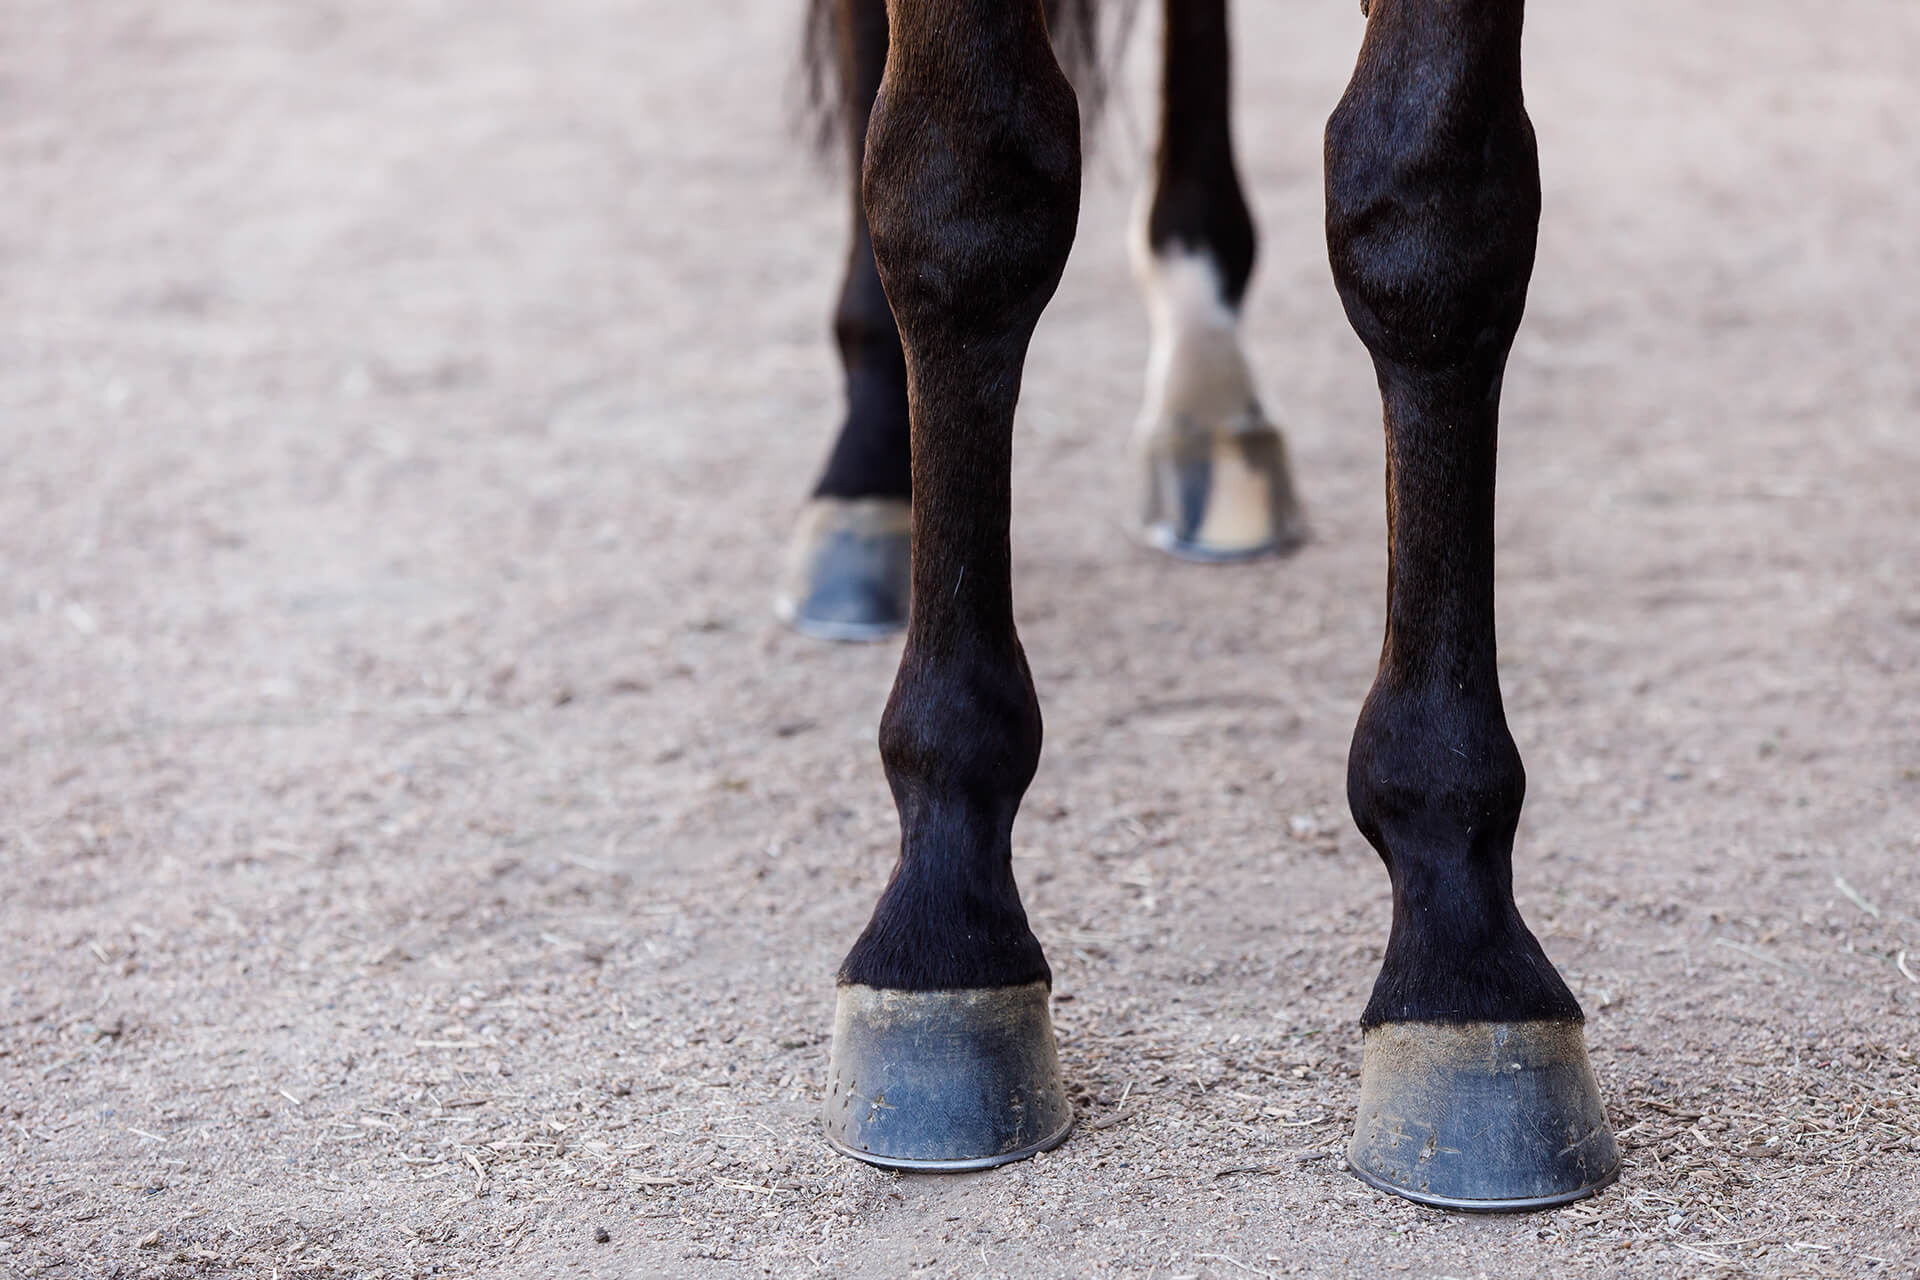 What is a horse leg called?